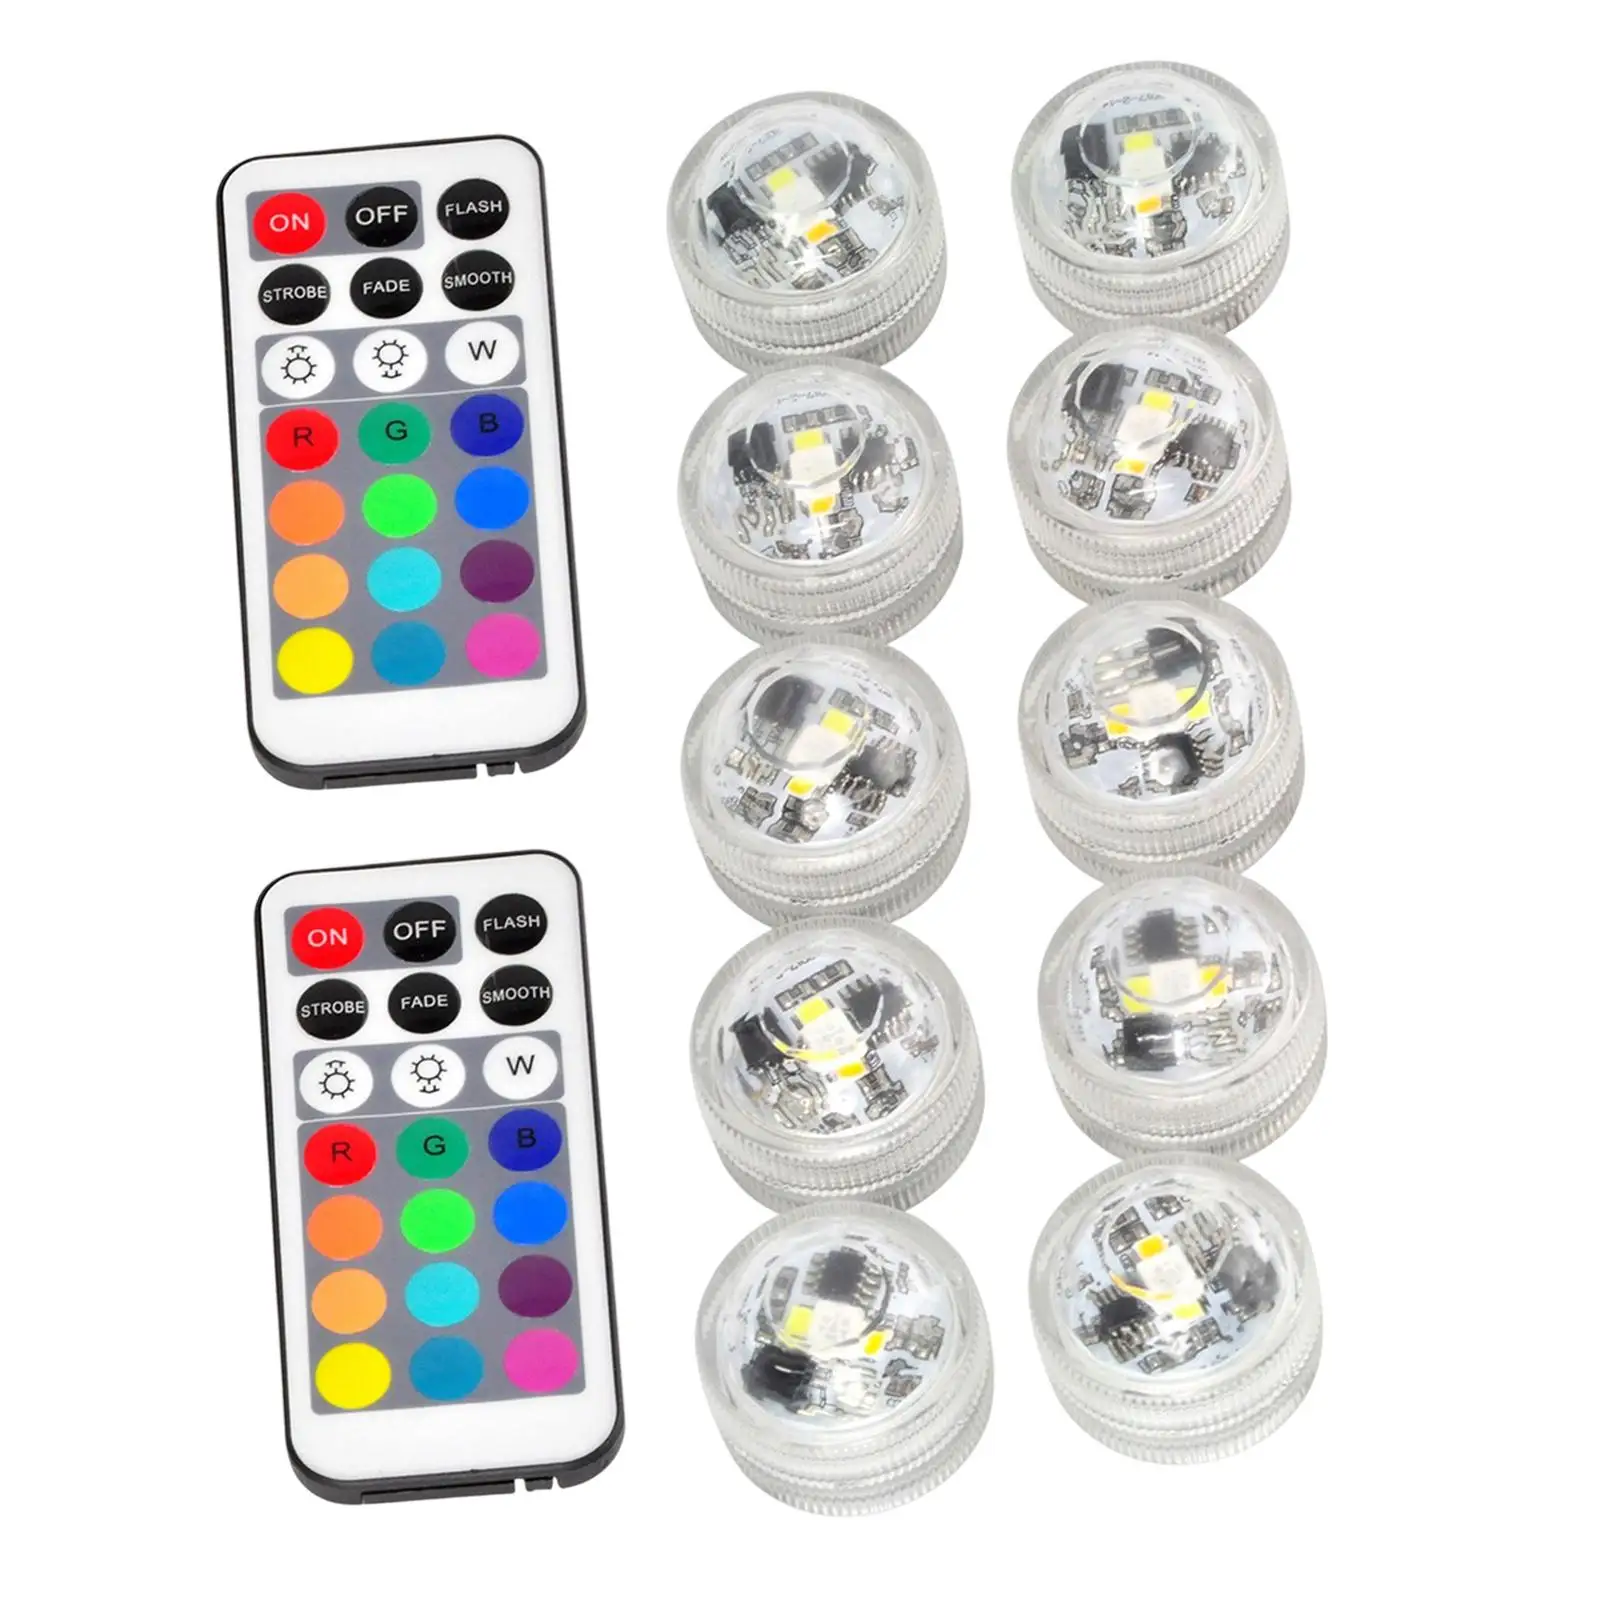 10 Pieces Fish Tank LED Lights Submersible Remote Control RGB Lamp Waterproof IP65 for Wedding Hot Tub Bath Fountains Pond